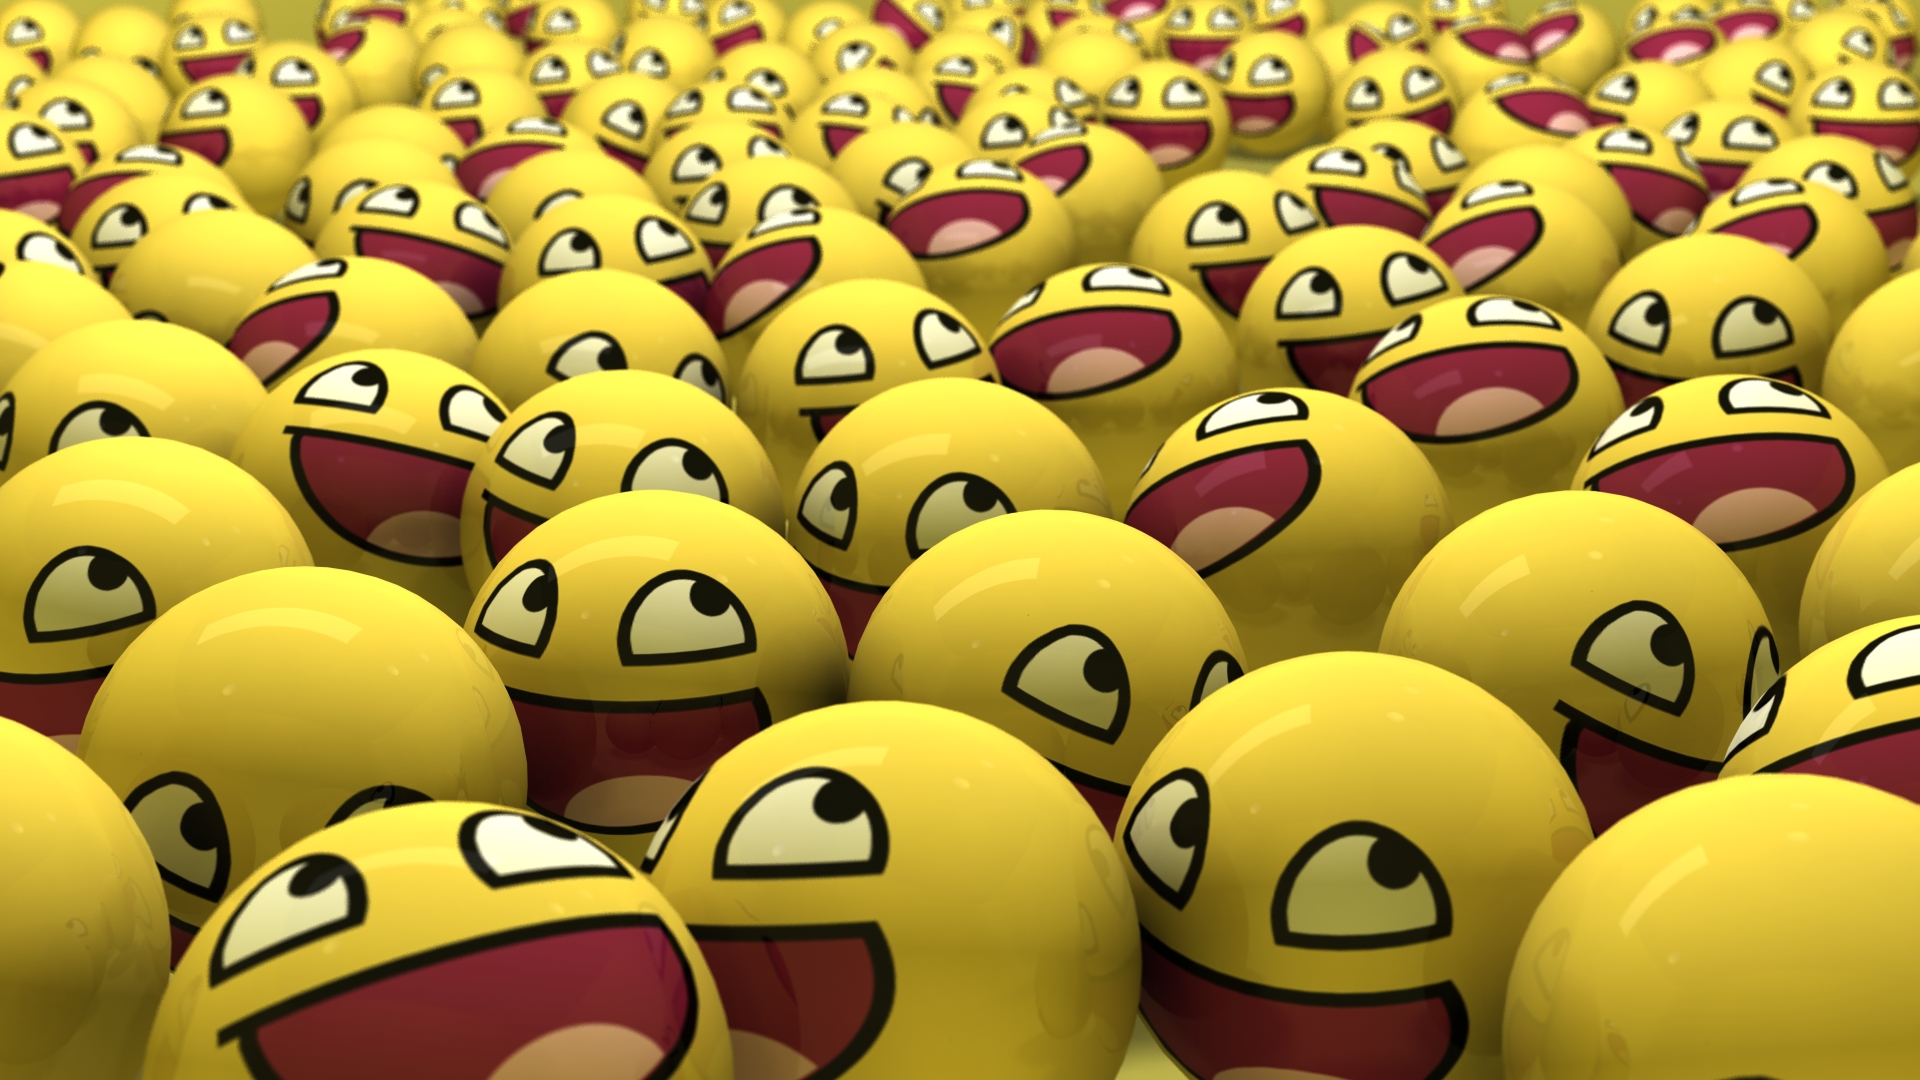 Smiley Faces wallpapers HD   446787 1920x1080